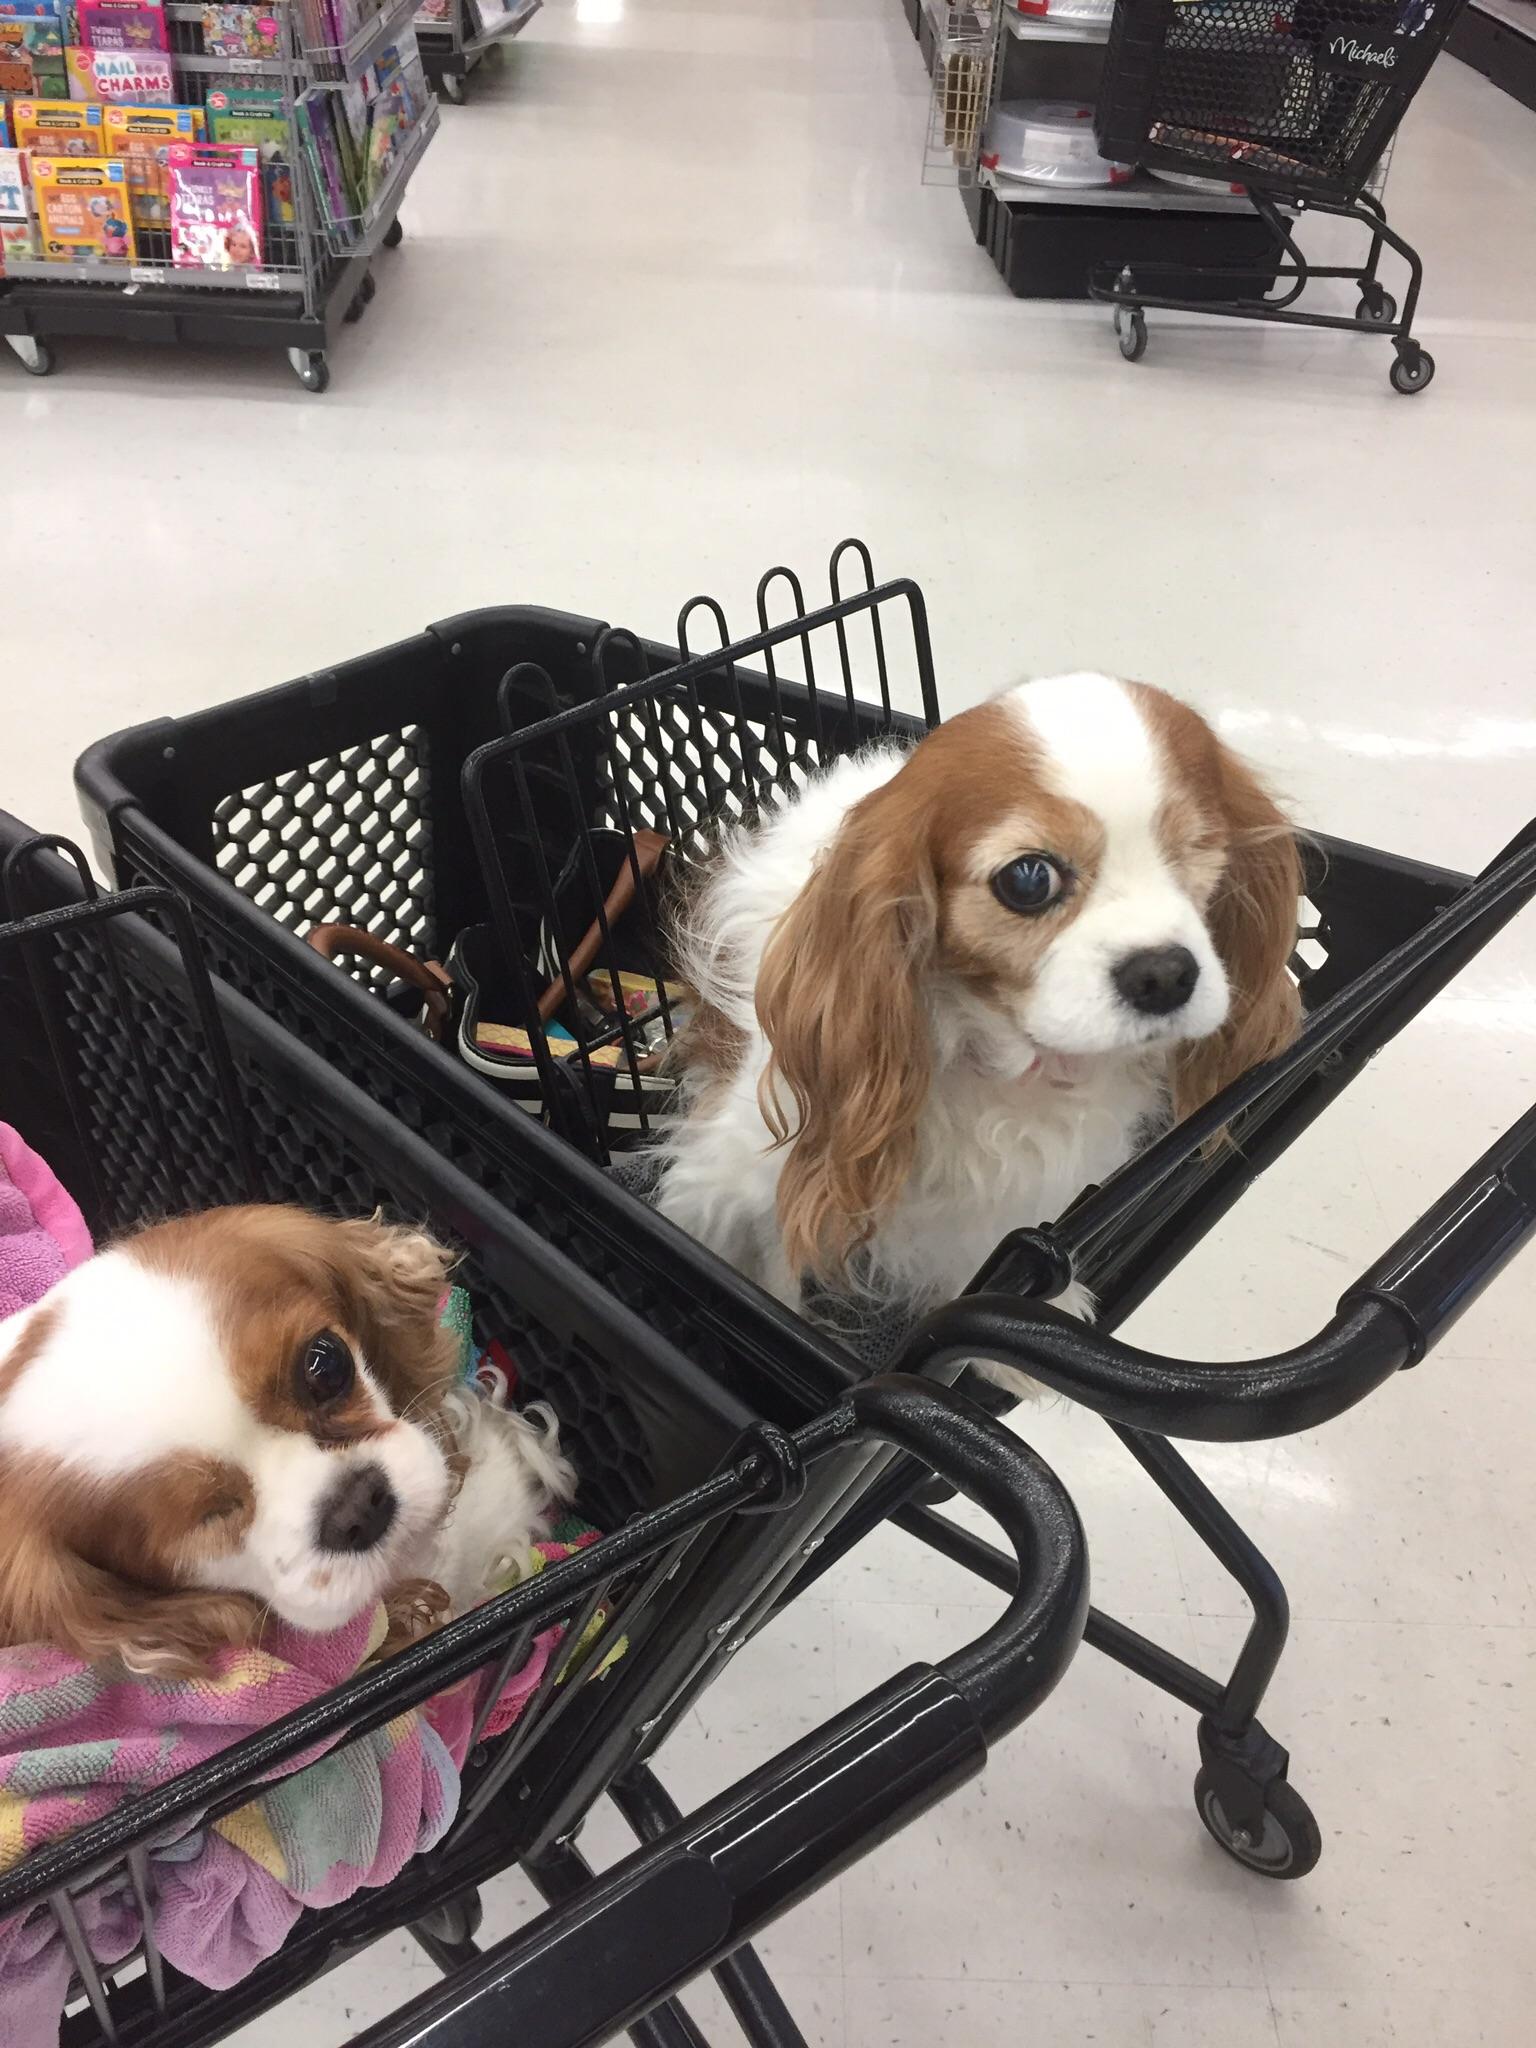 identical but unrelated dogs meet in a store. Both are missing an eye.